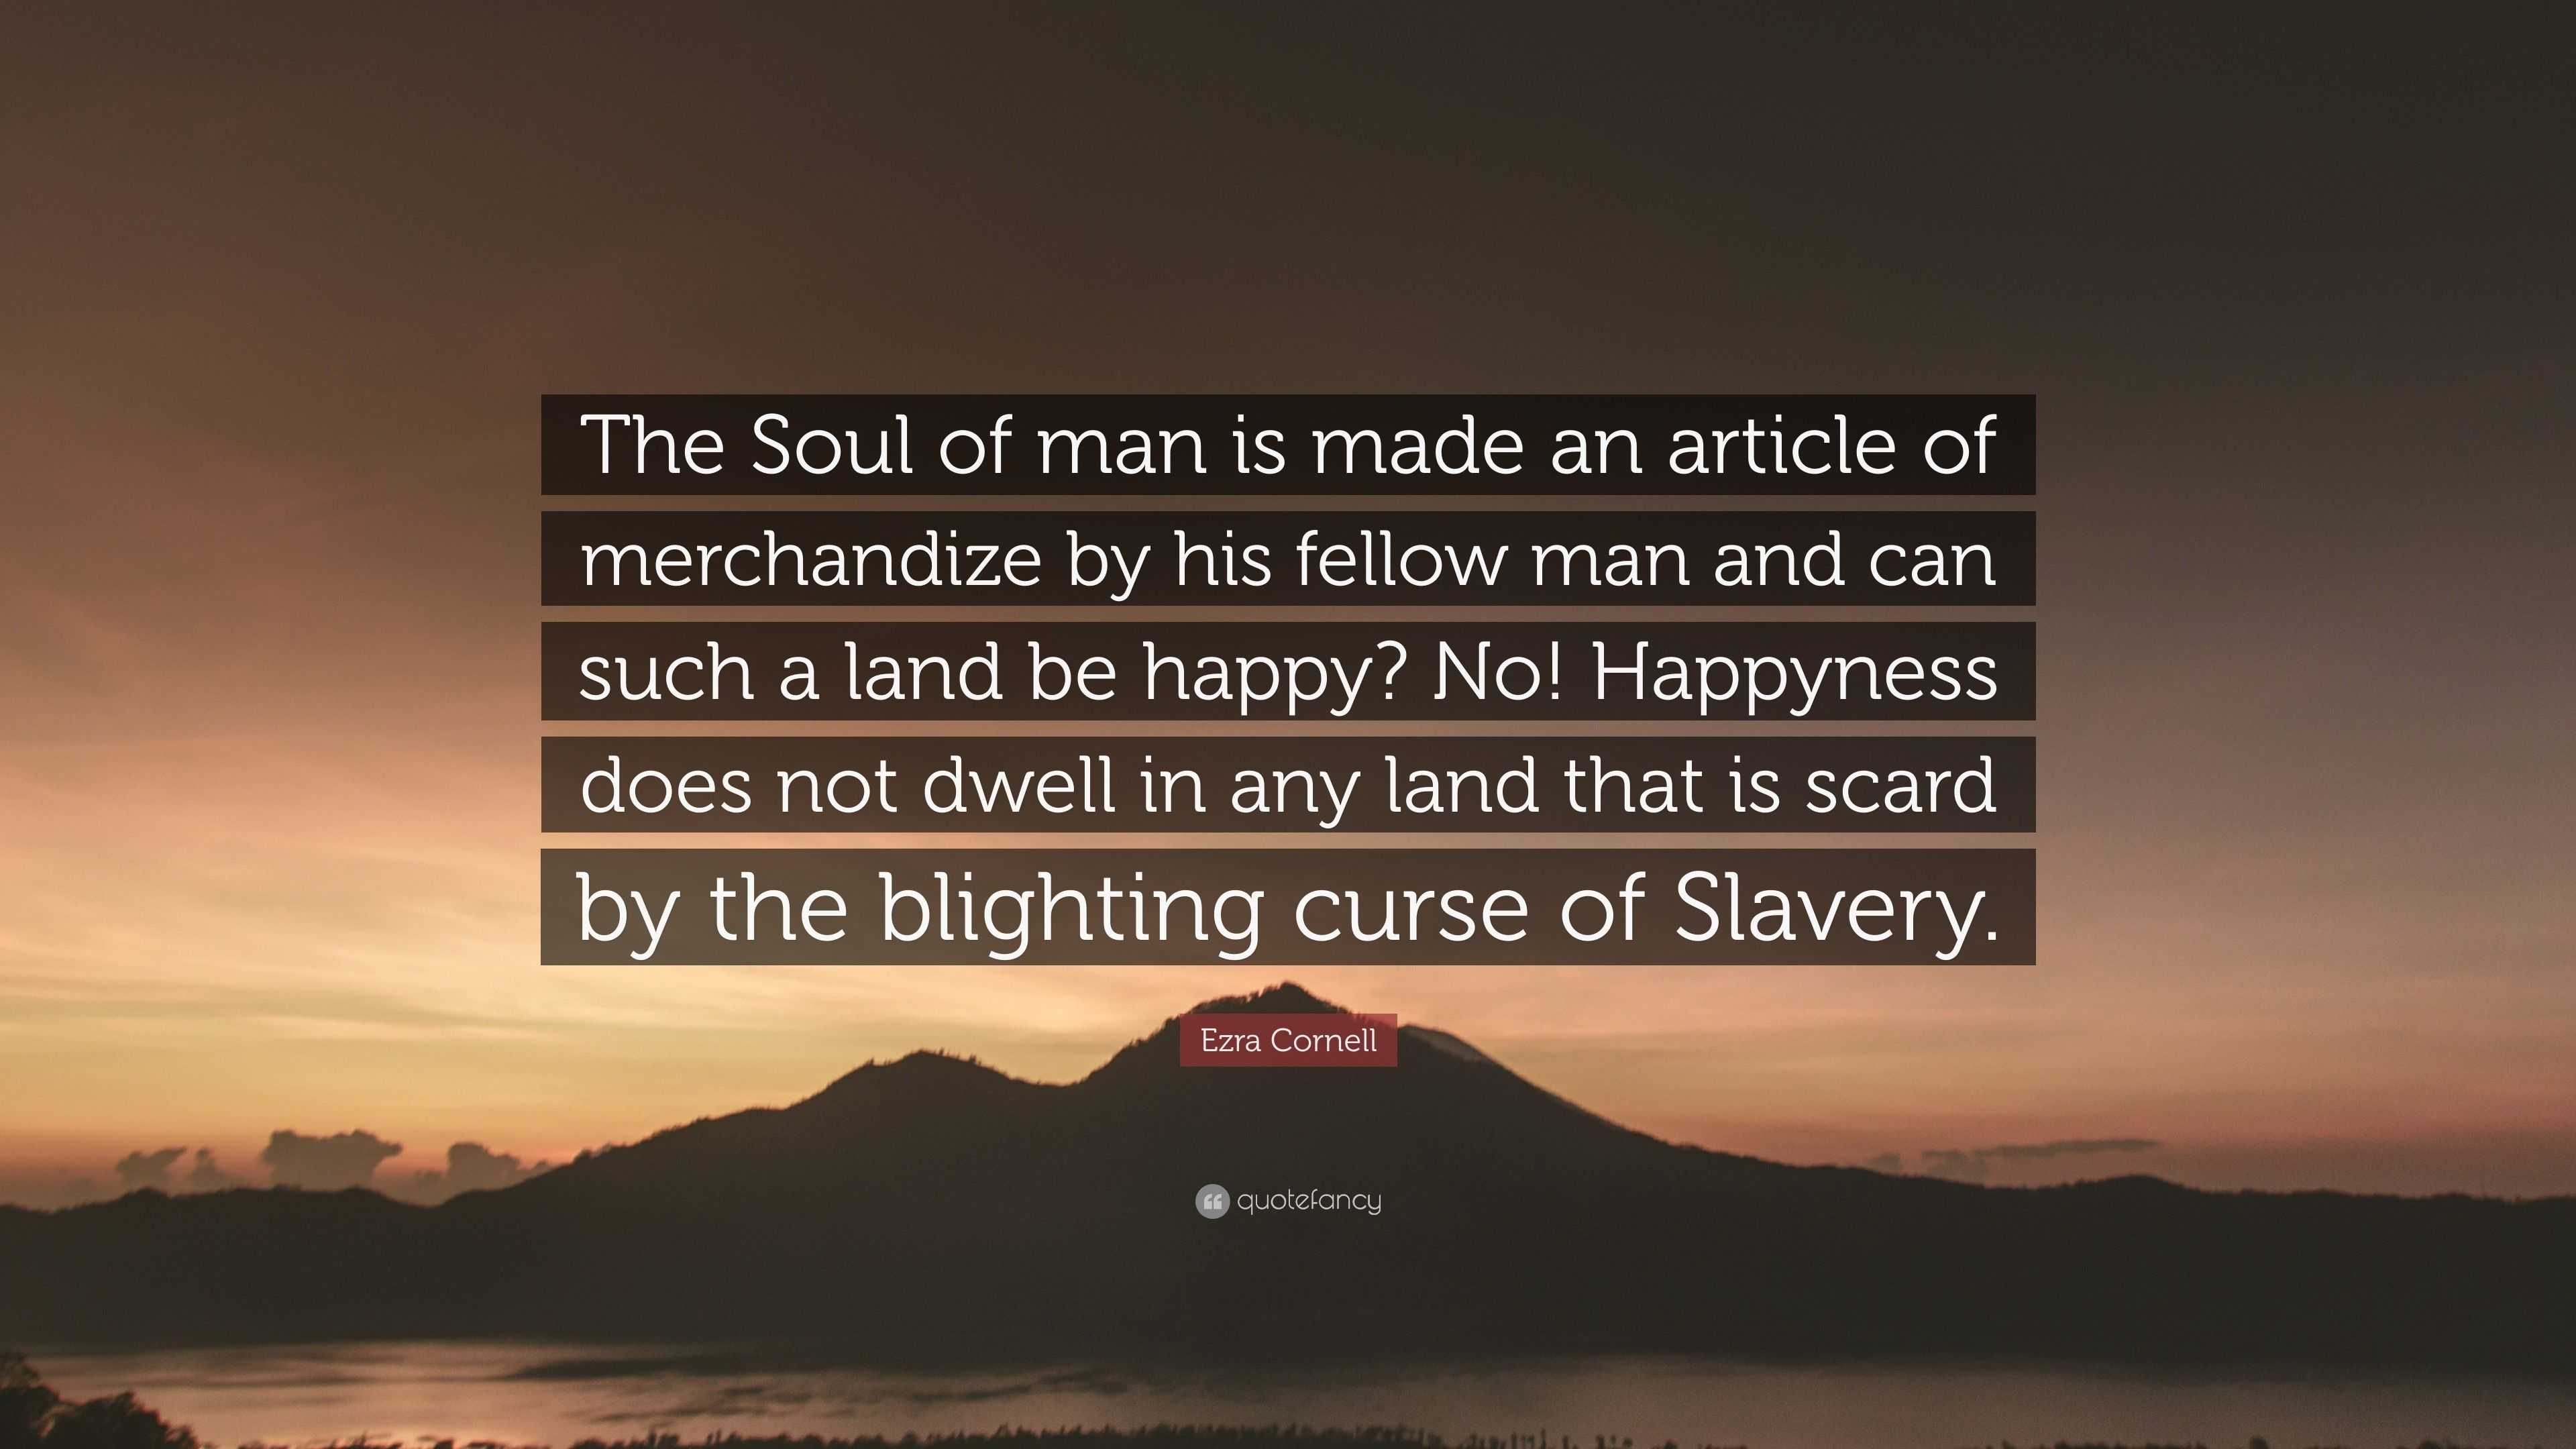 Ezra Cornell Quote: “The Soul of man is made an article of merchandize ...